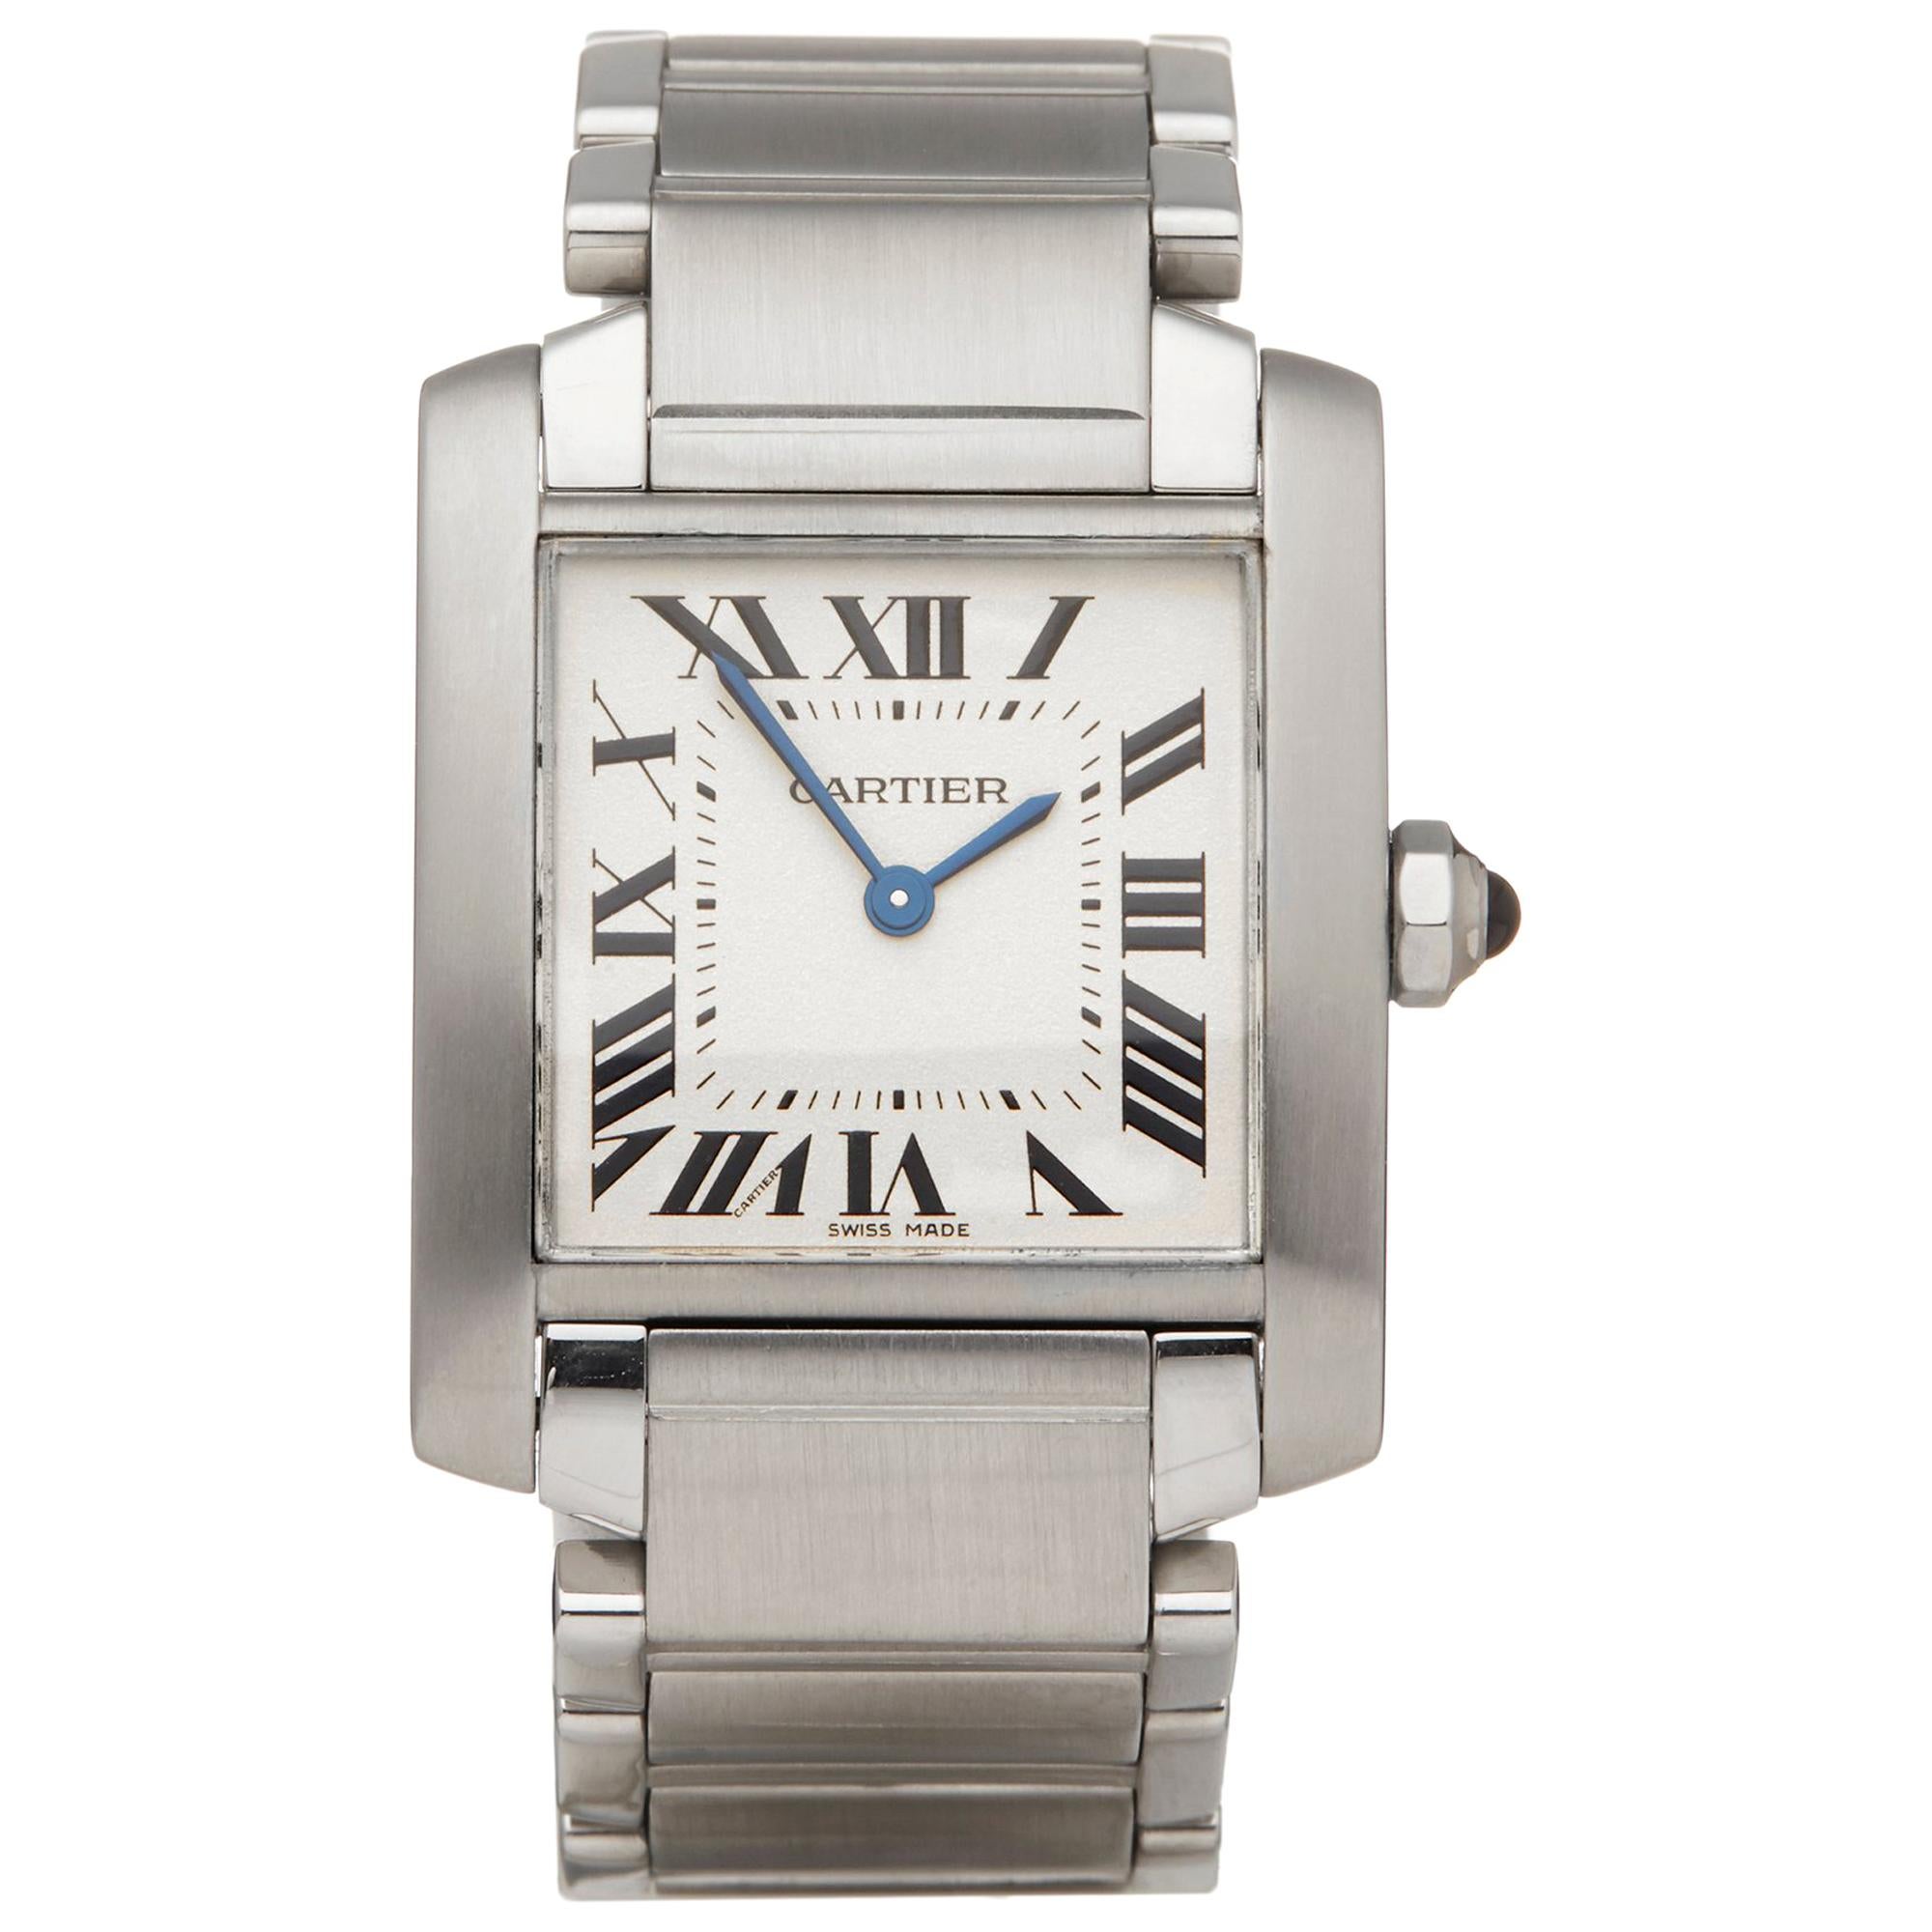 Cartier Tank Francaise Stainless Steel 2301